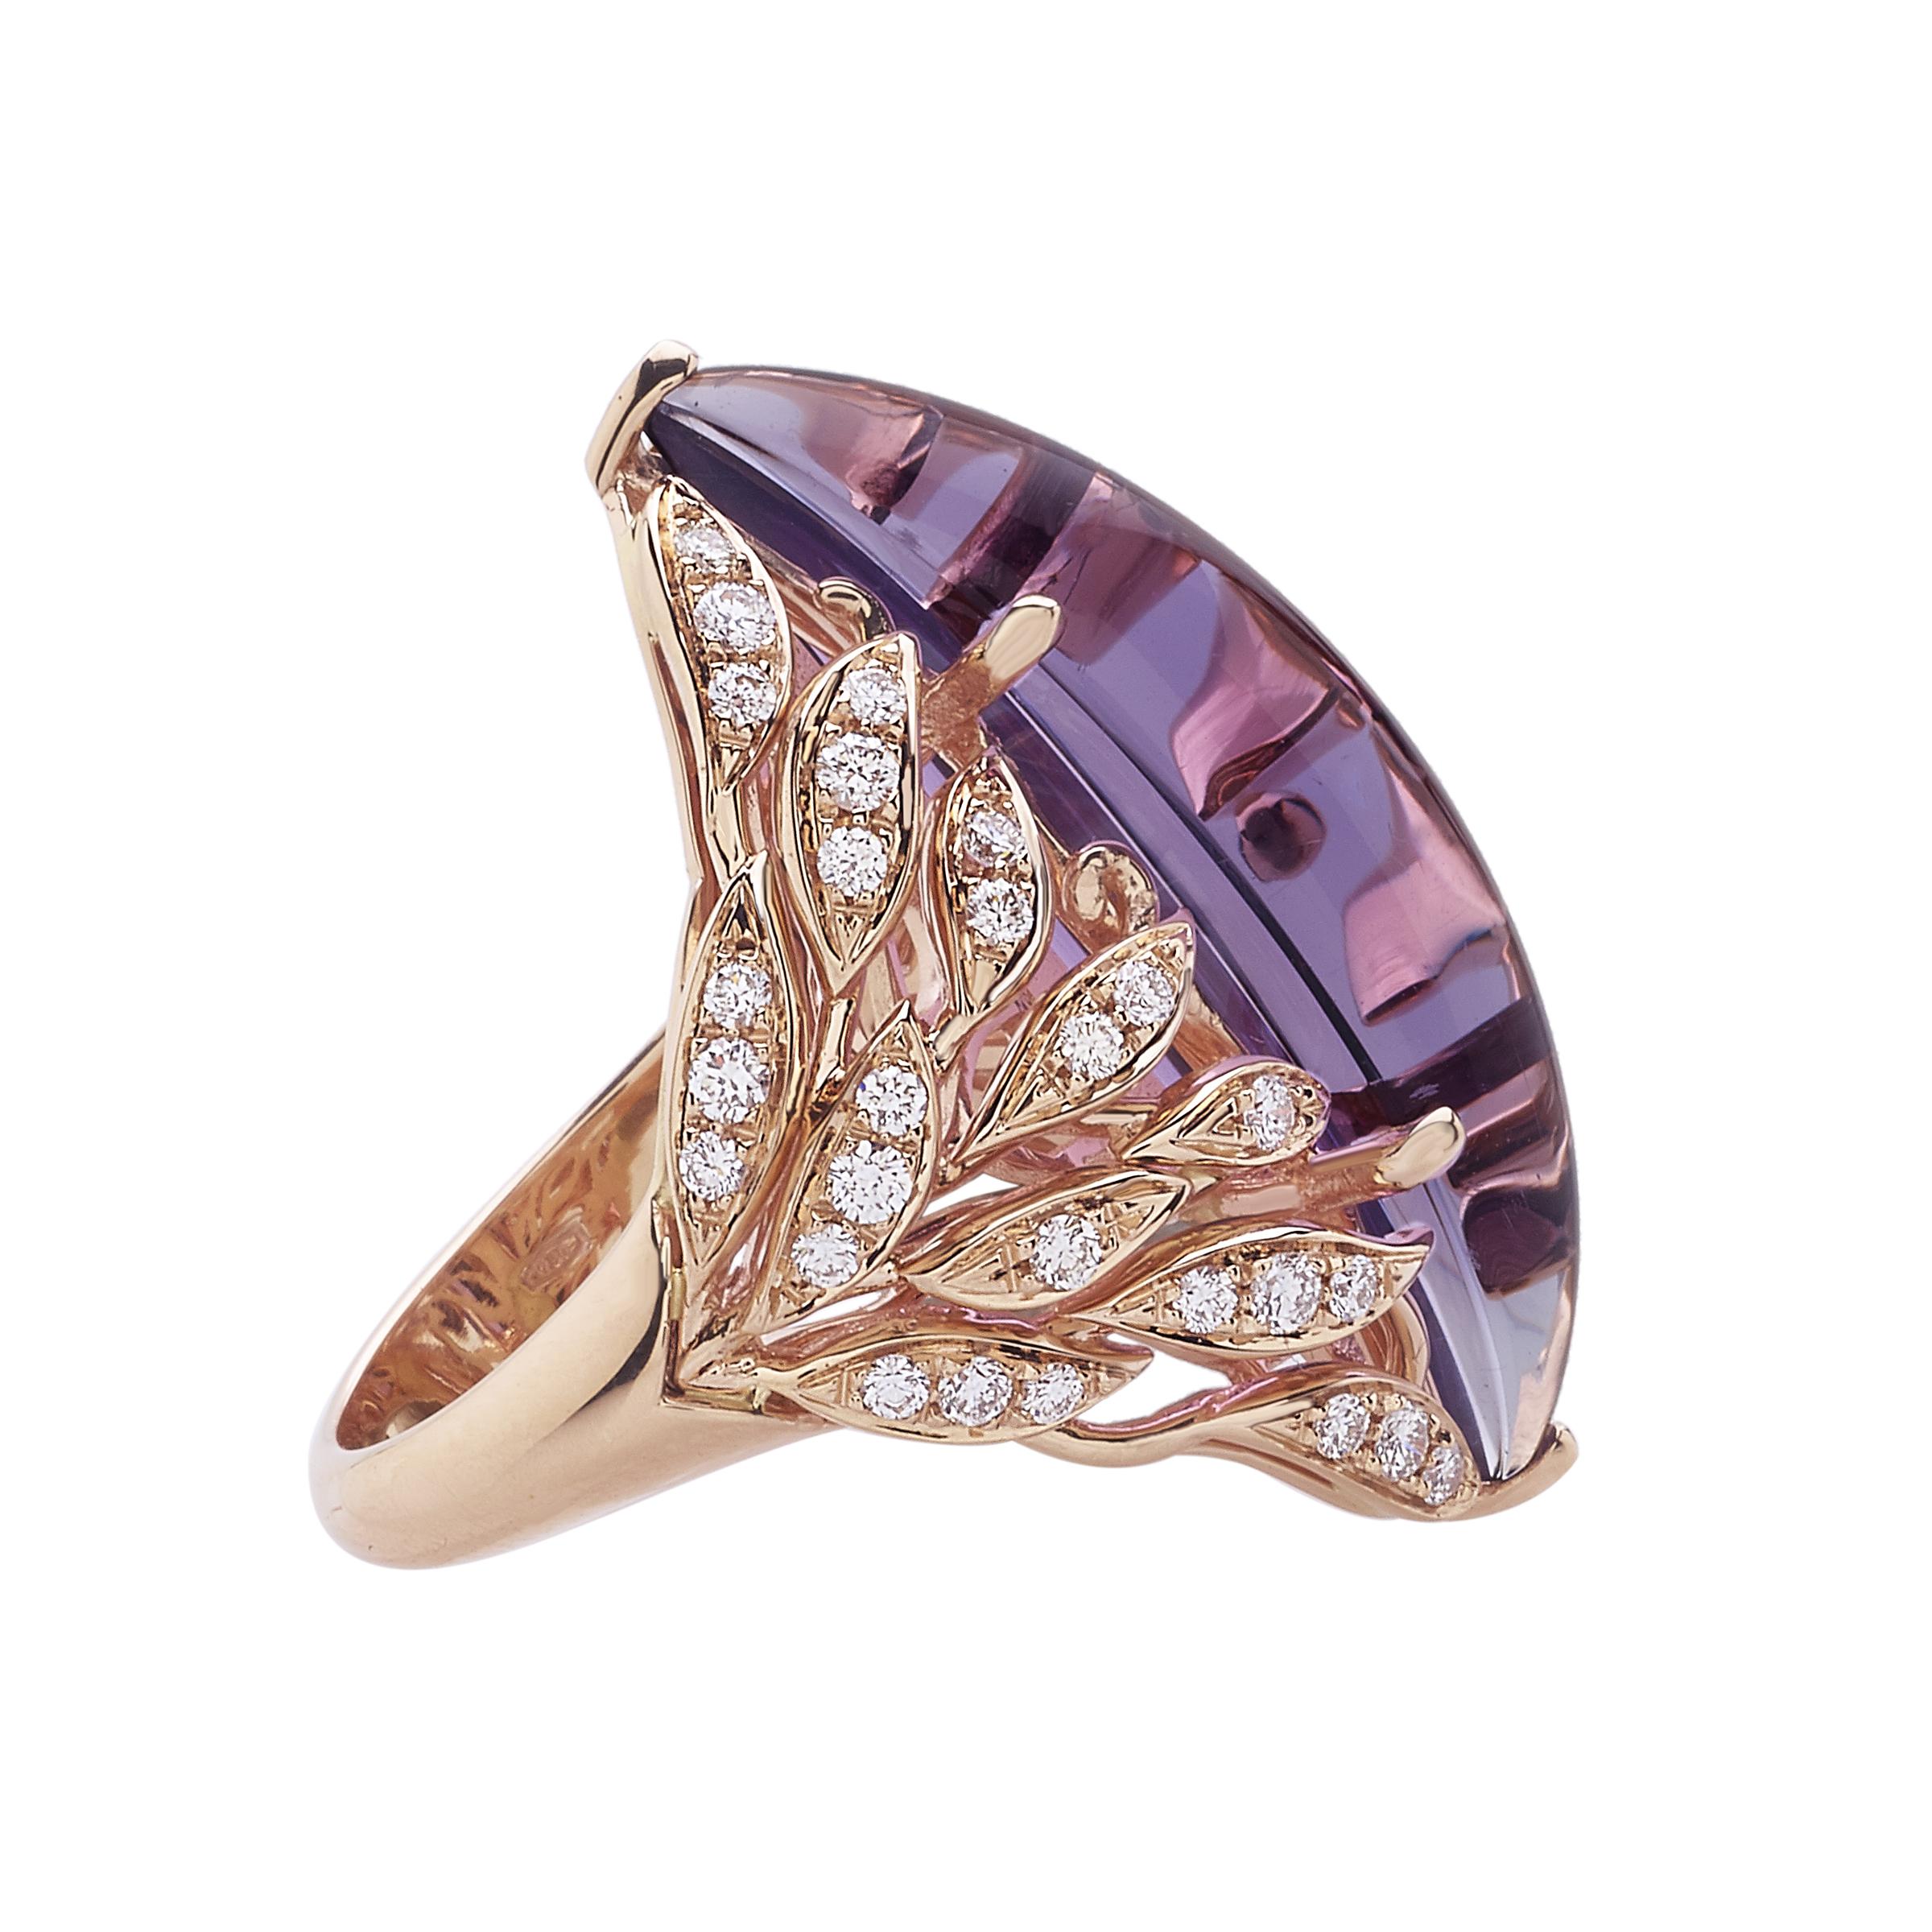 18 Carat Rose Gold Amethyst and Round Brilliant Cut Diamonds Cocktail Ring featuring 0,77 carats of white diamonds, G color, VVS clarity and a 12,33 carats cabochon cut amethyst; total piece weight 14,50 gr. Ring size 6,5 US, 53 EU
Handmade in